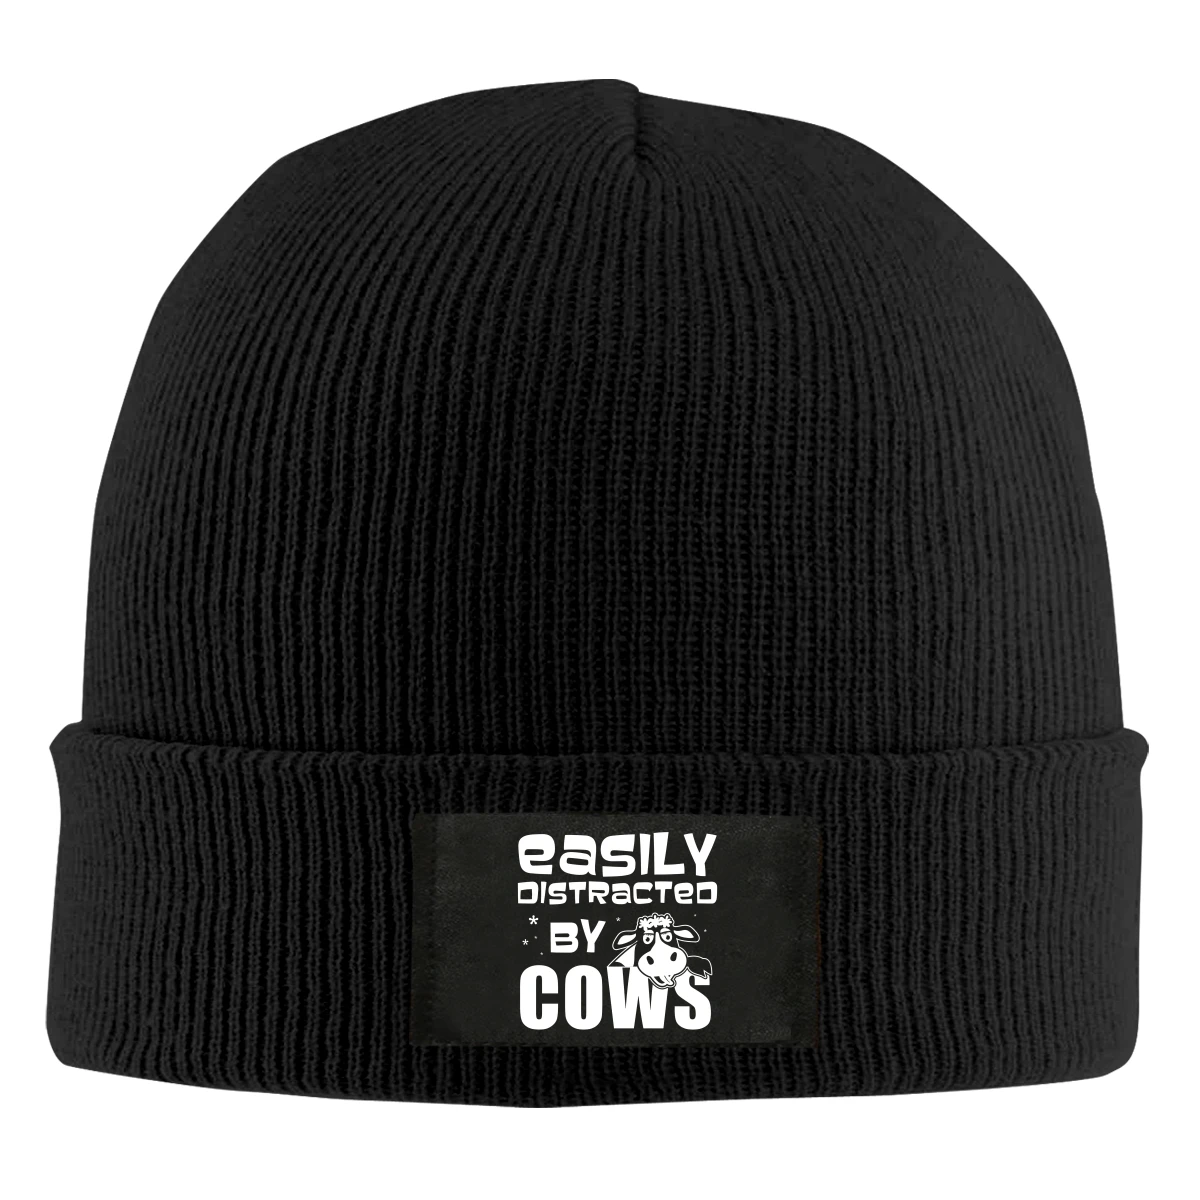 

Easily Distracted By Cows Beanie Hats For Men Women With Designs Winter Slouchy Knit Skull Cap